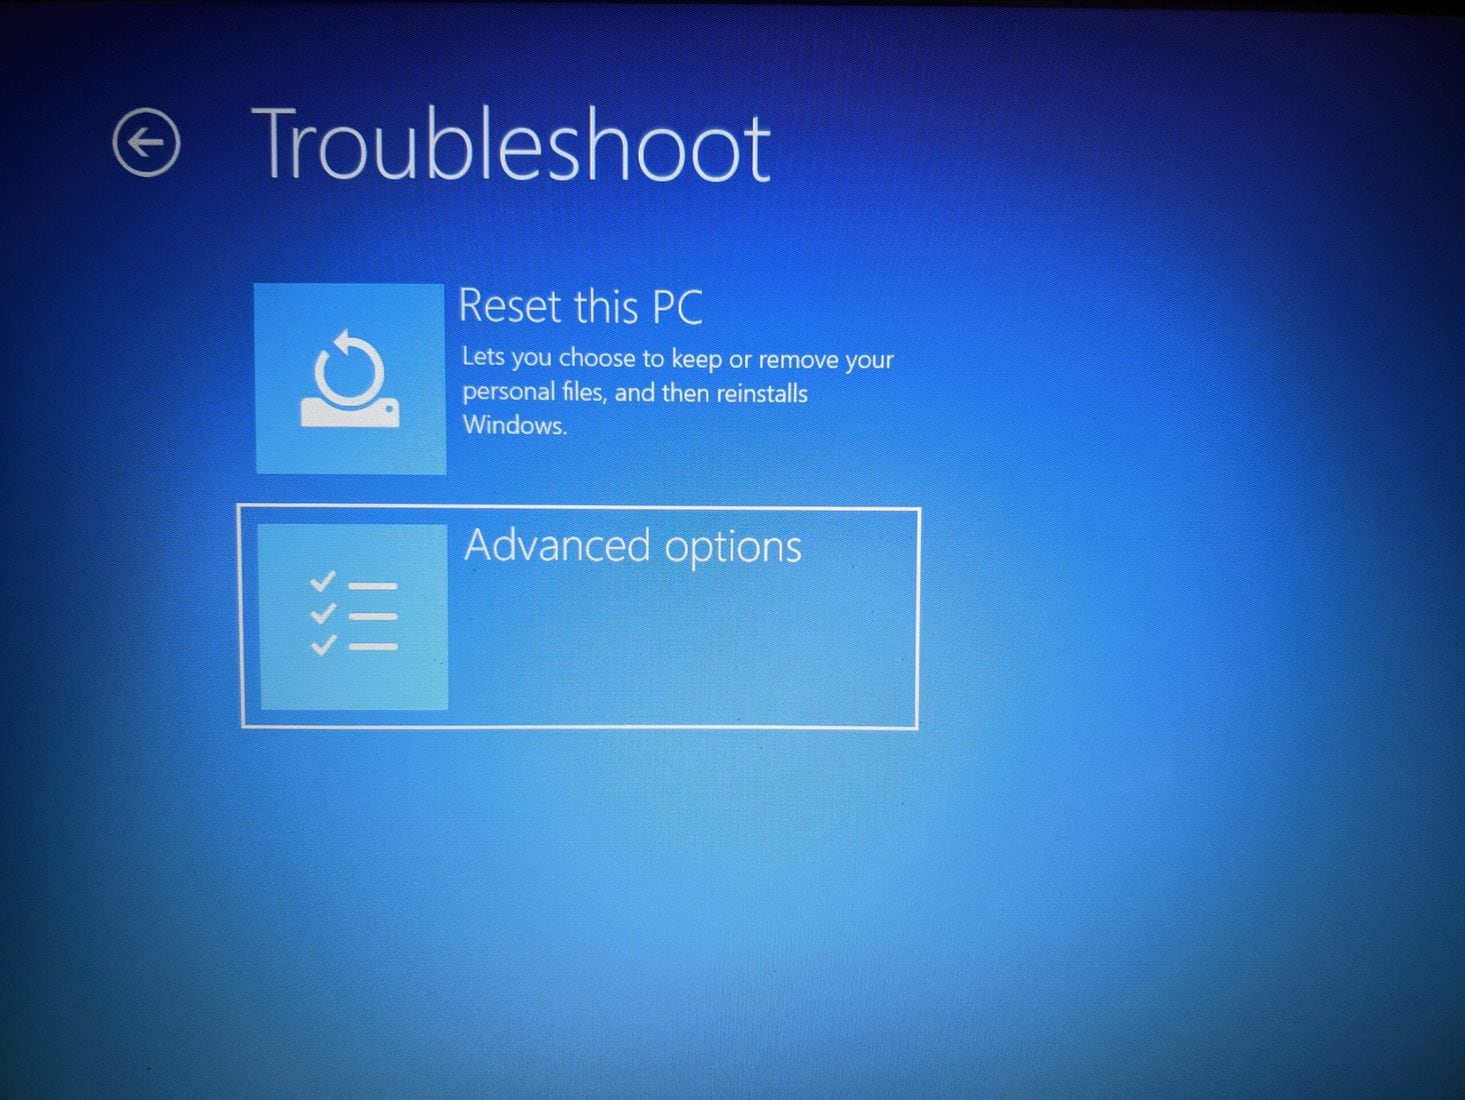 Select Advanced Options from Troubleshoot menu